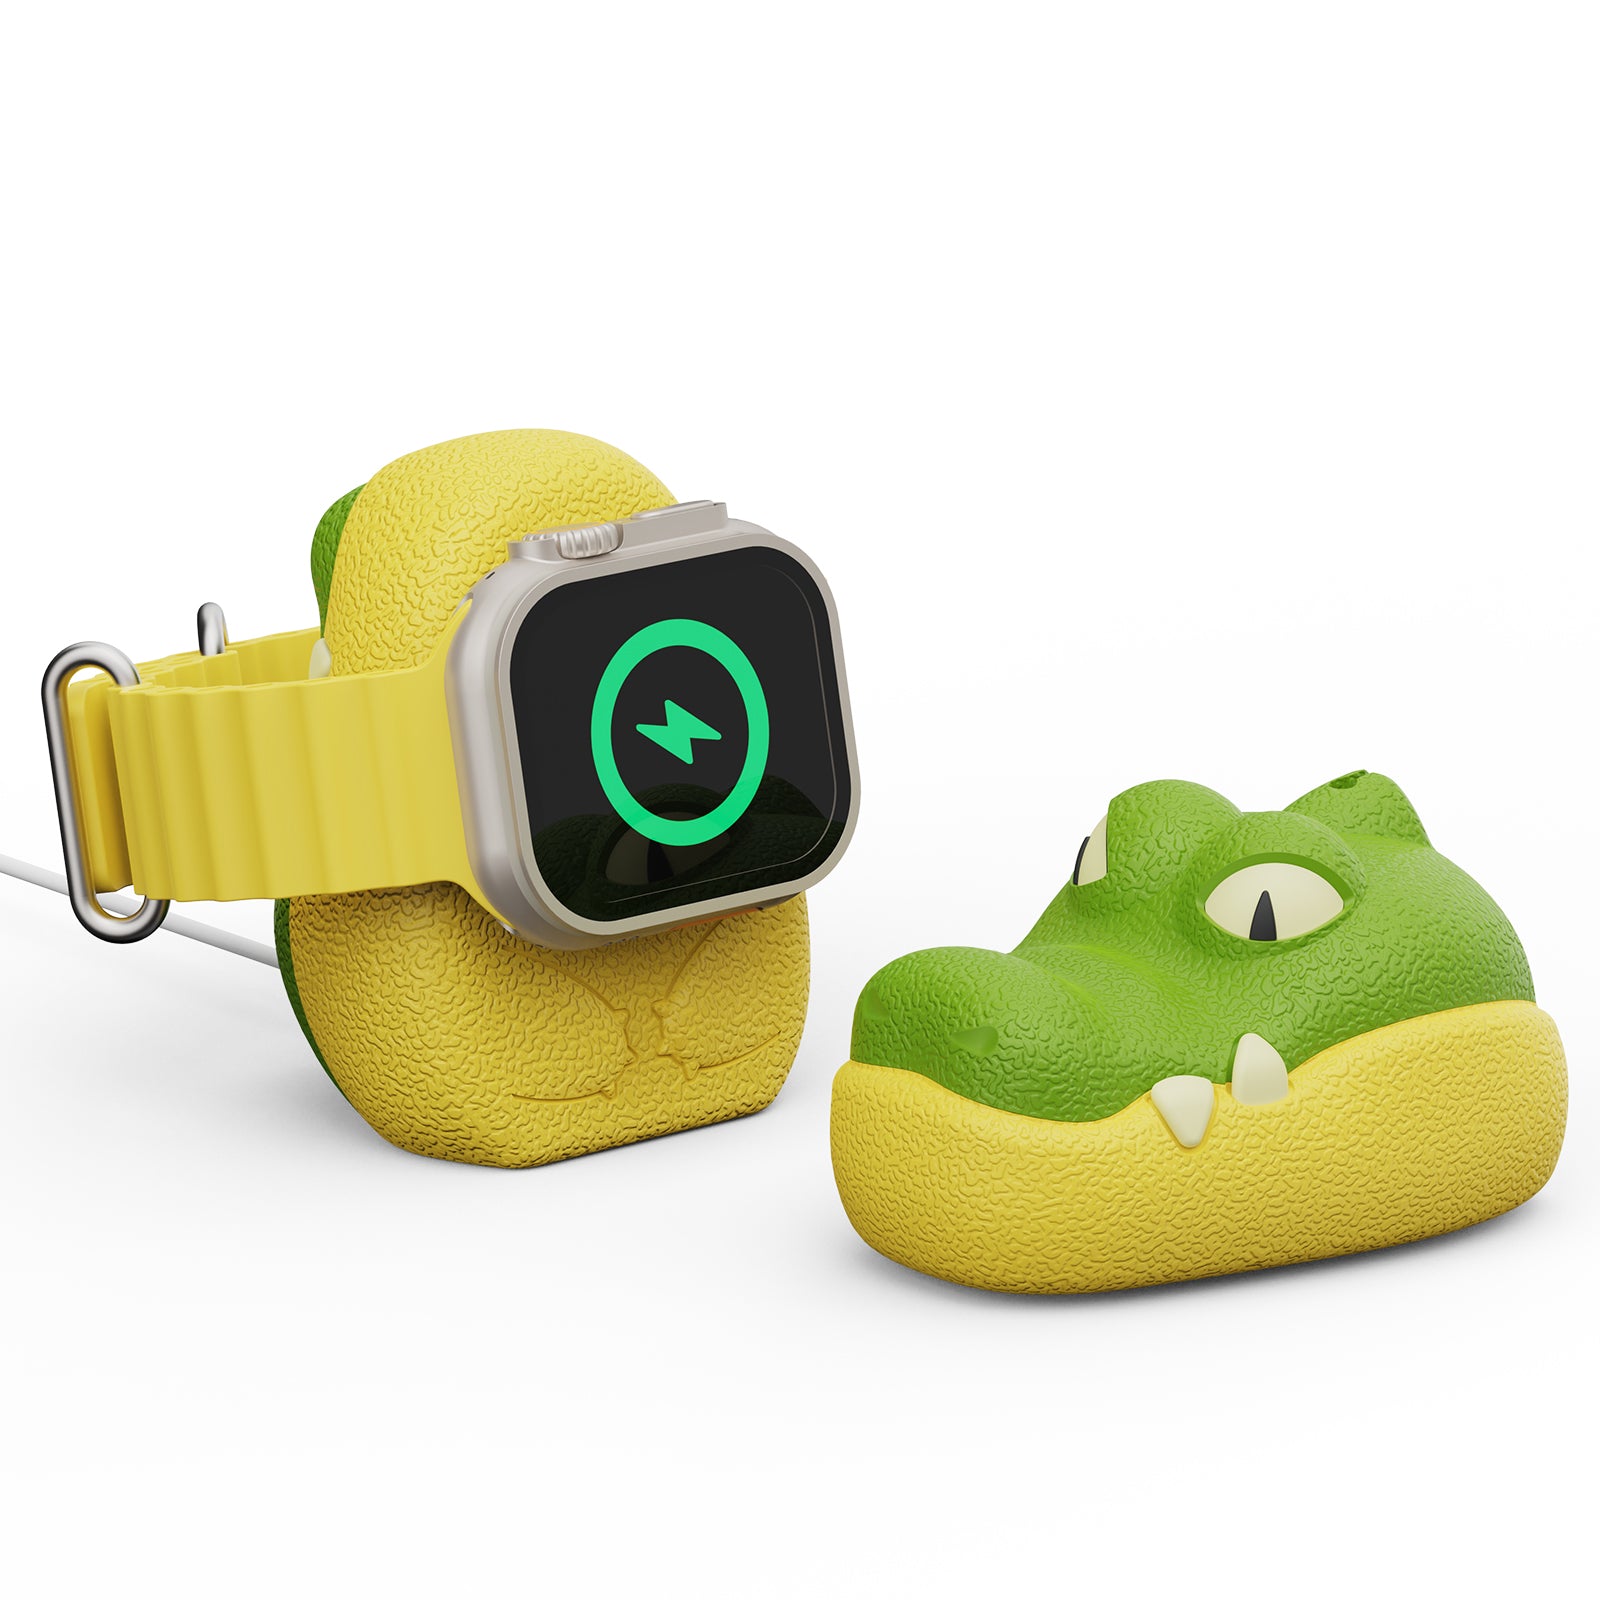 SIKAI Cute Crocodile Charger Stand Compatible with Apple Watch Series 8/7/6/SE/5/4/3/2/1 (45mm, 44mm, 42mm, 41mm, 40mm, 38mm), Skin-Friendly Silicone, Nightstand Mode, Home/Office Use, Ideal Gift SIKAI CASE